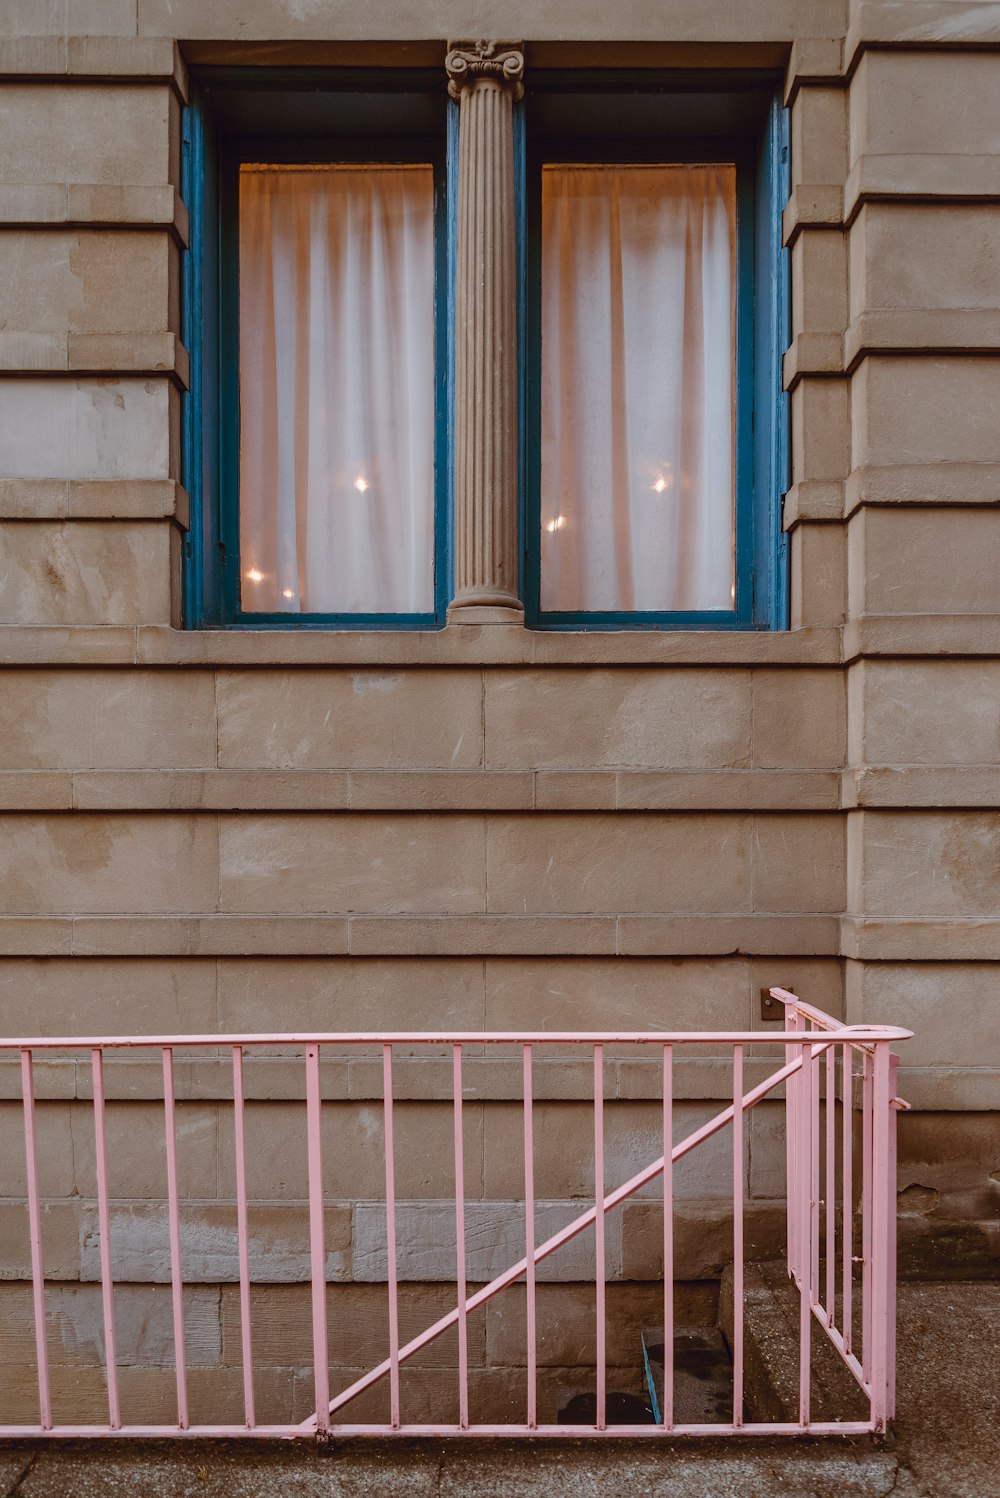 a pink gate sitting in front of a window